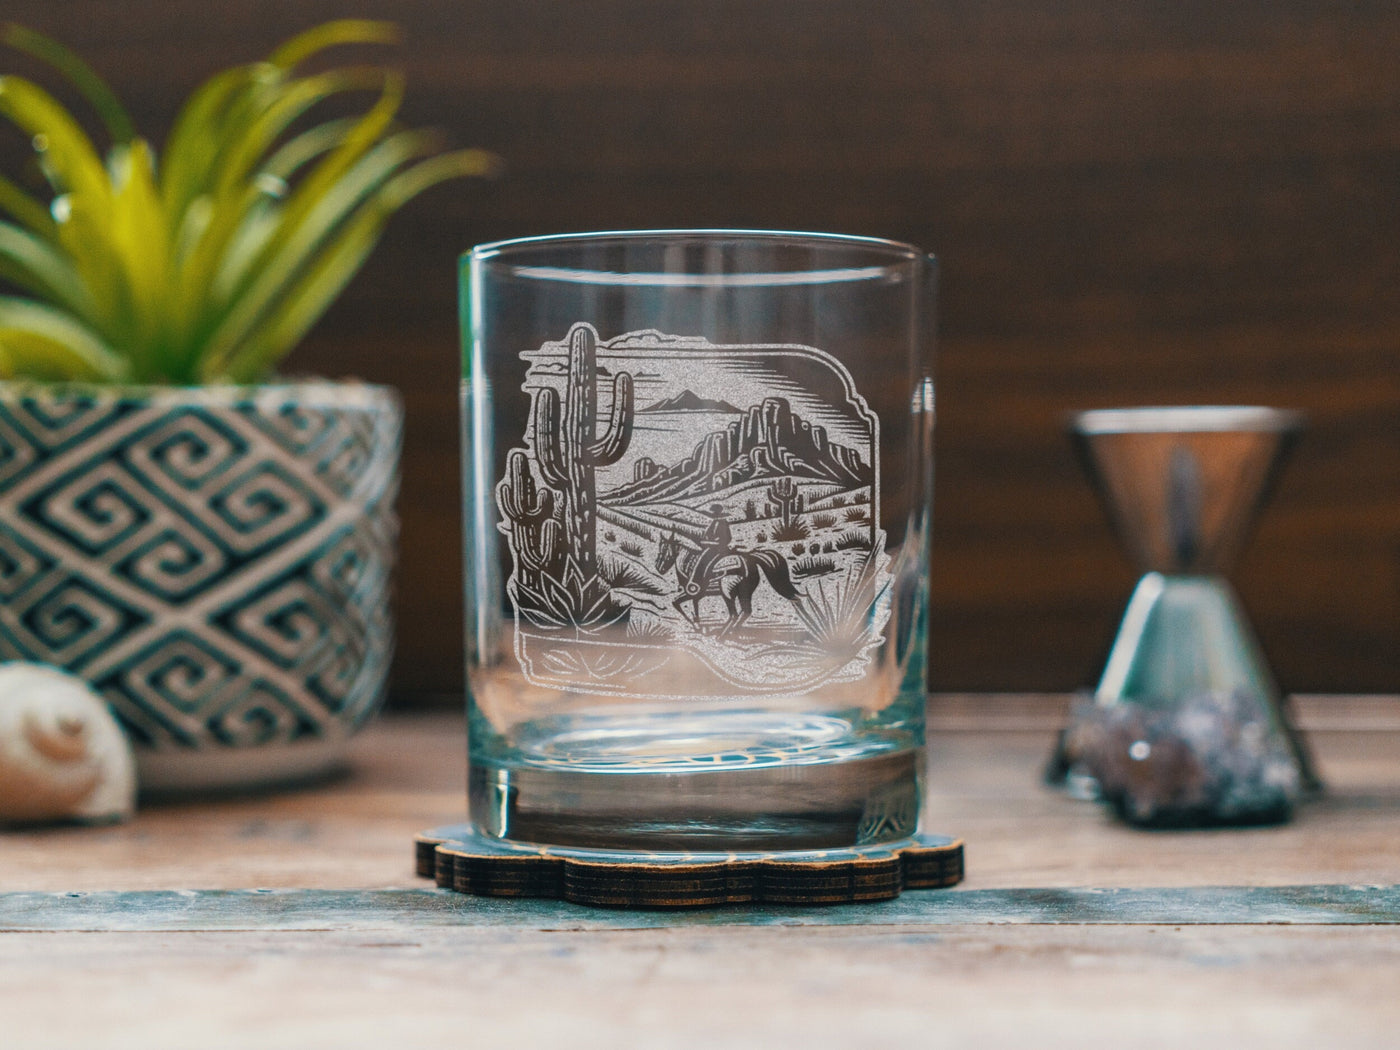 Riding Cowboy Scene Glasses | Personalized etched glassware for beer, whiskey, wine & cocktails. Western Desert Scene, Southwestern Decor.